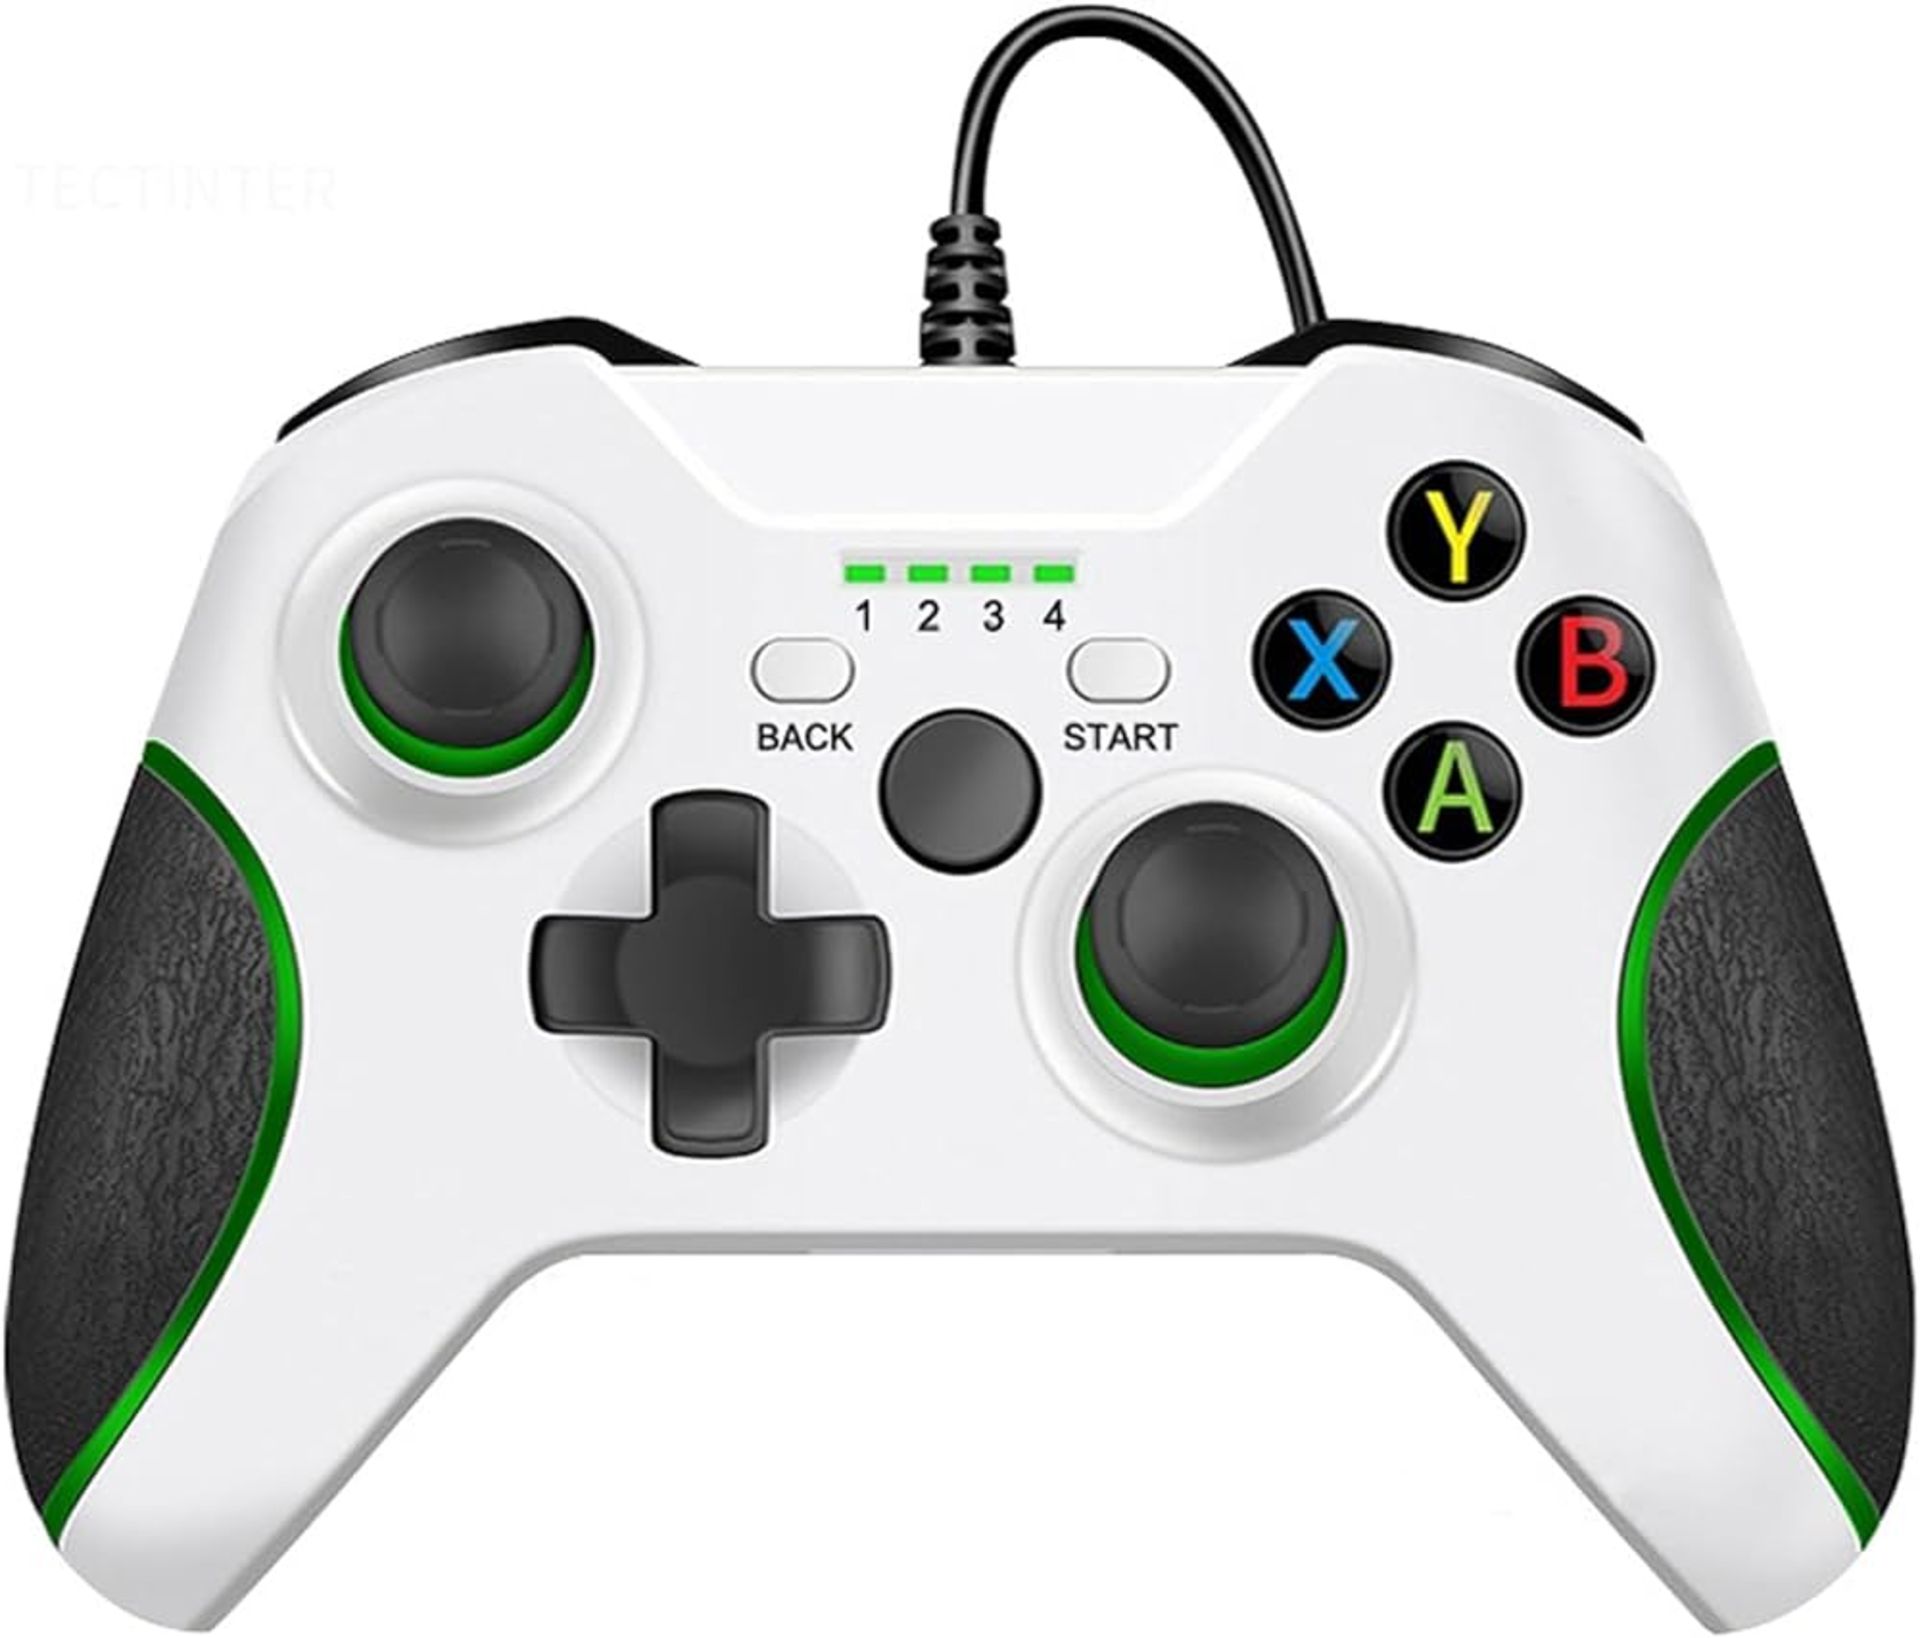 Wired Usb Game PAd Controller (Delivery Band A)